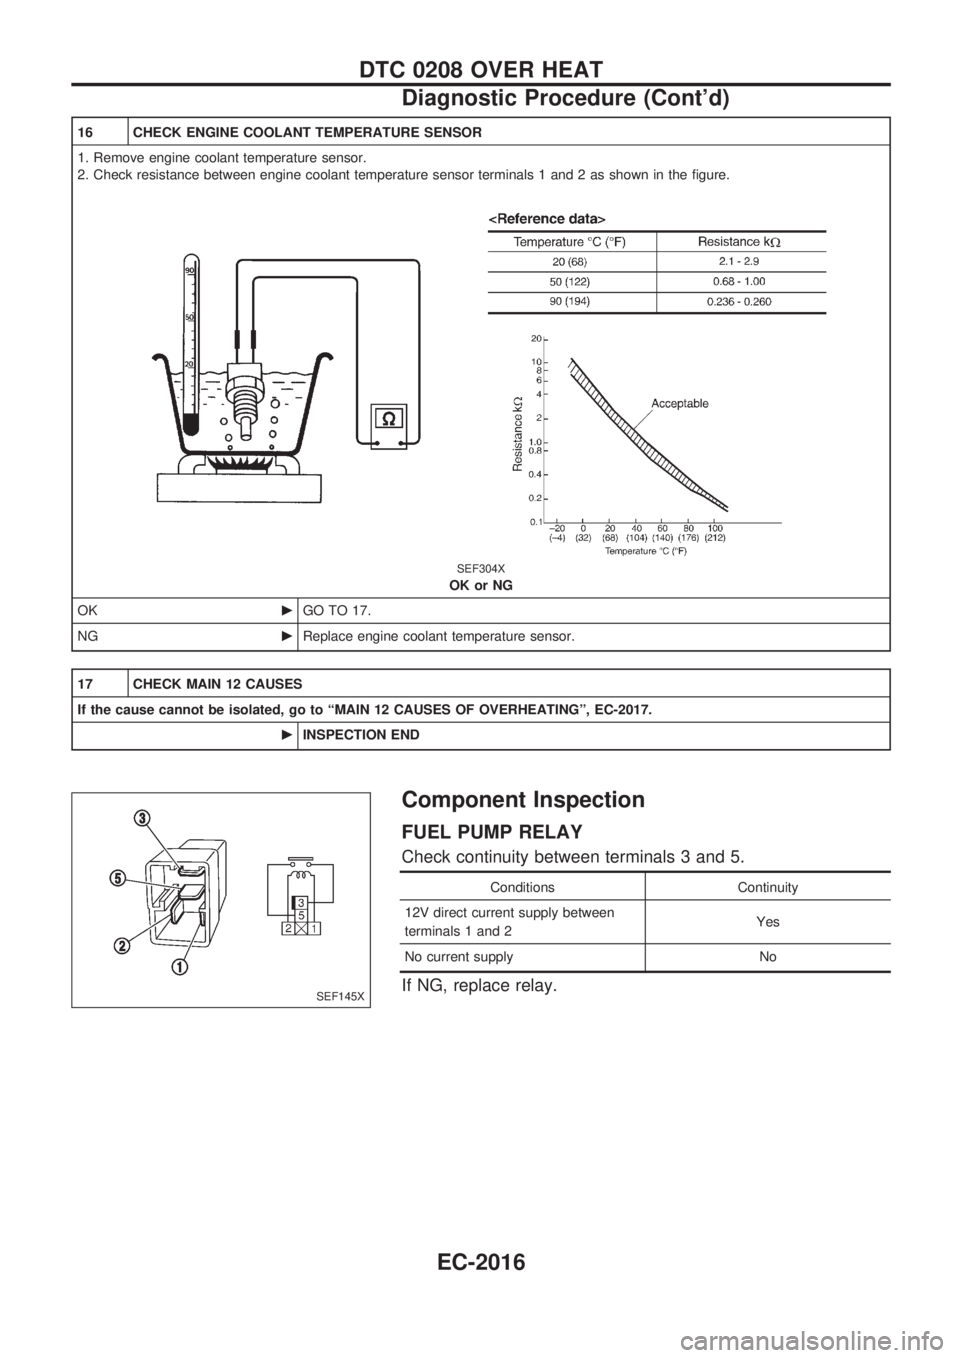 NISSAN PATROL 2001  Electronic Repair Manual 16 CHECK ENGINE COOLANT TEMPERATURE SENSOR
1. Remove engine coolant temperature sensor.
2. Check resistance between engine coolant temperature sensor terminals 1 and 2 as shown in the figure.
SEF304X
